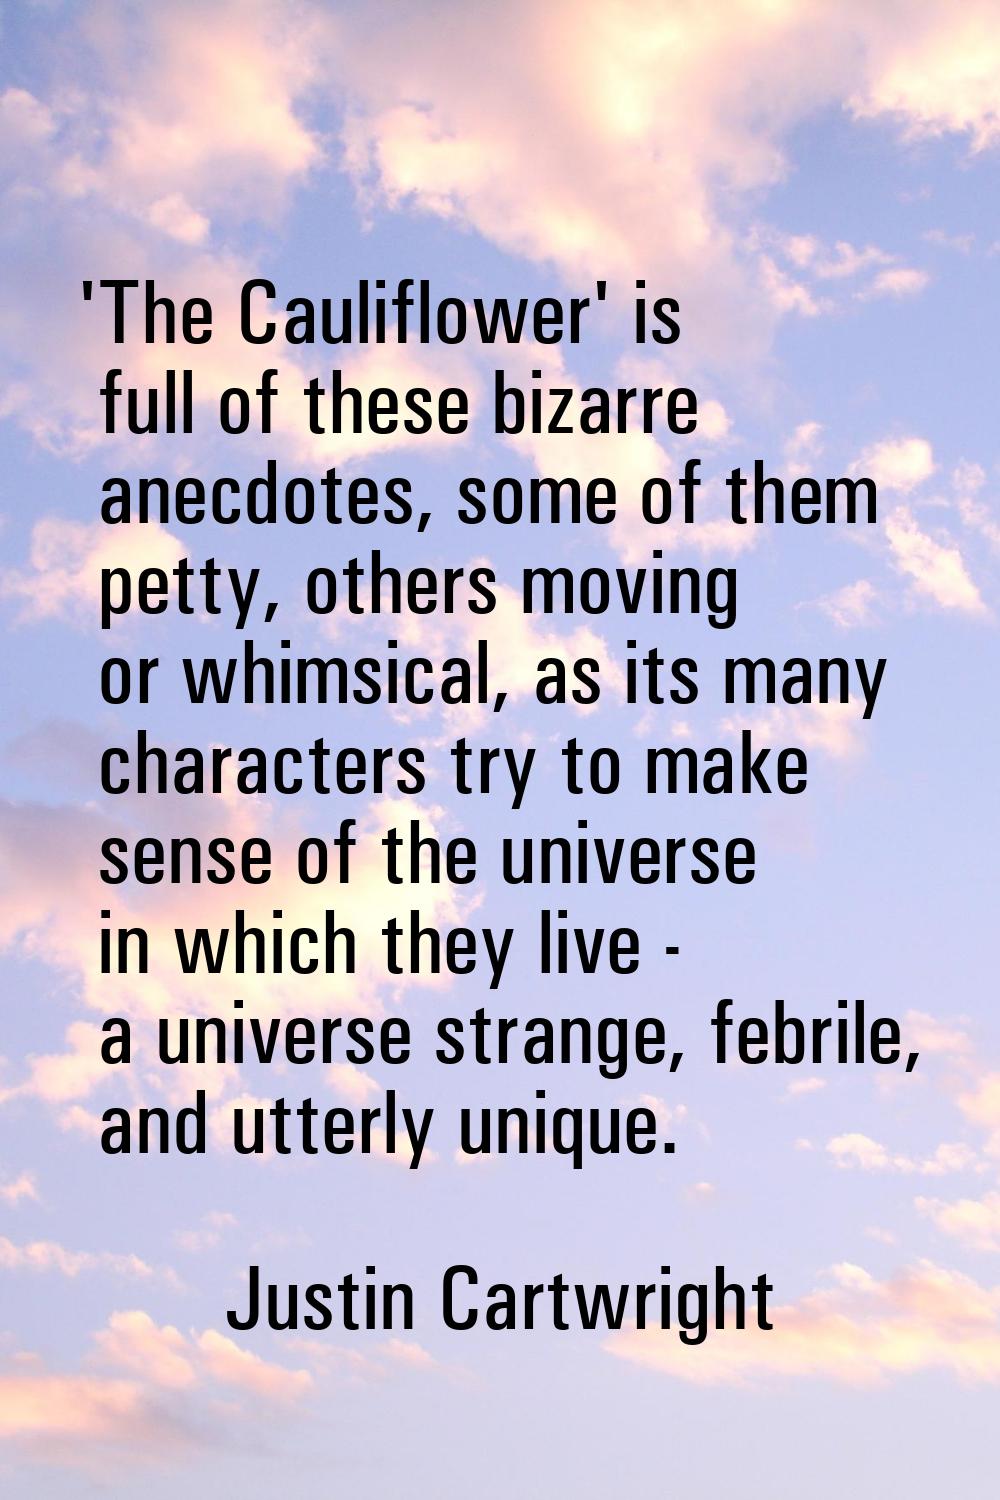 'The Cauliflower' is full of these bizarre anecdotes, some of them petty, others moving or whimsica